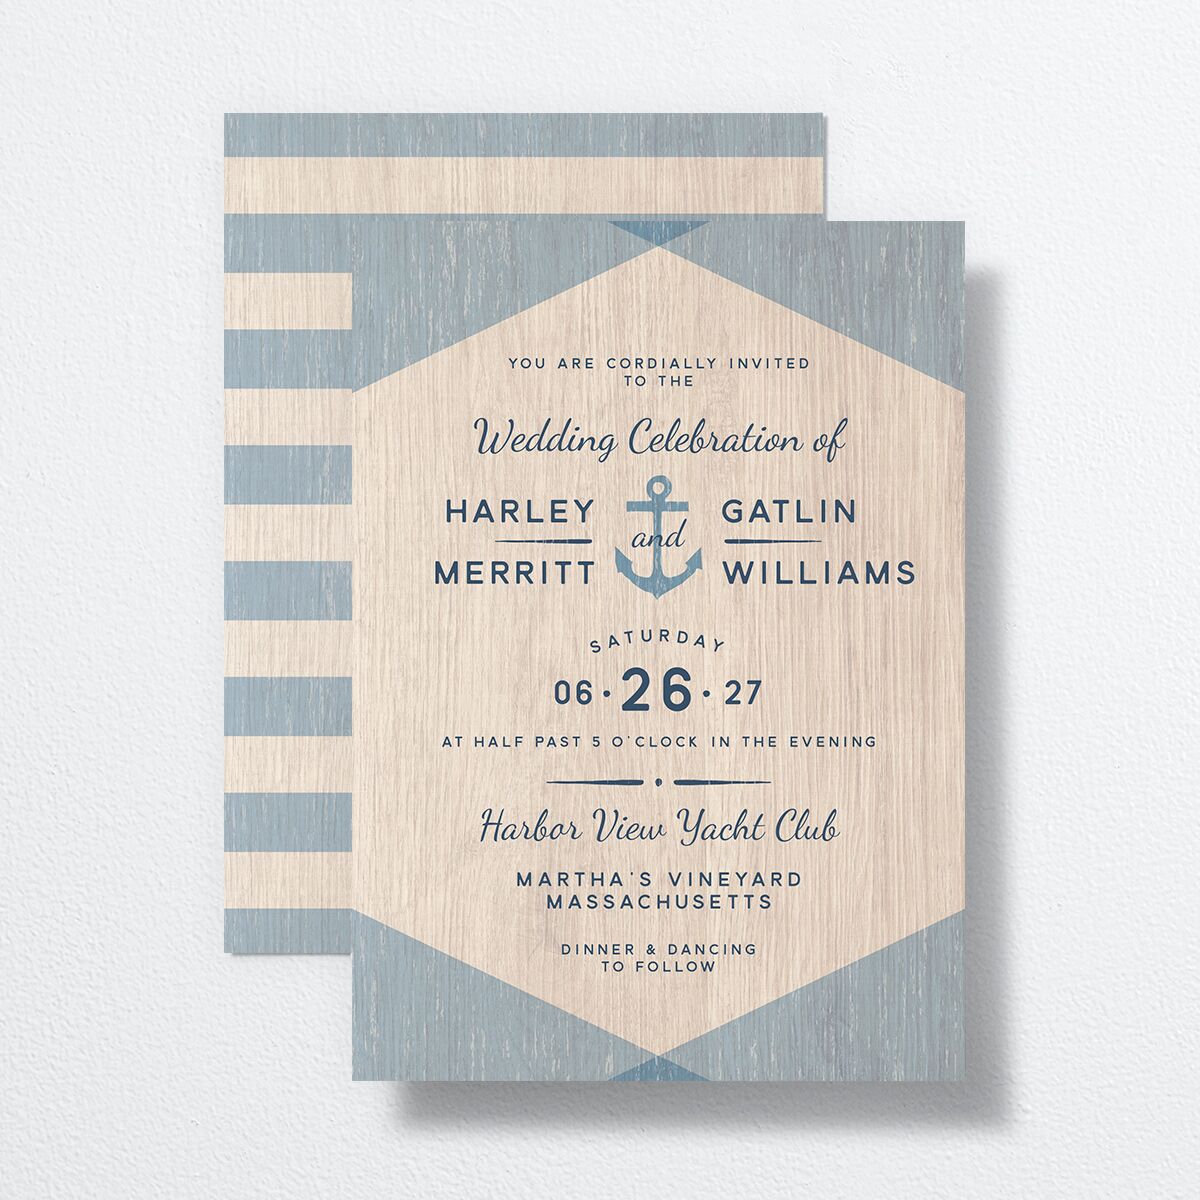 Rustic Seaside Wedding Invitations front-and-back in Blue